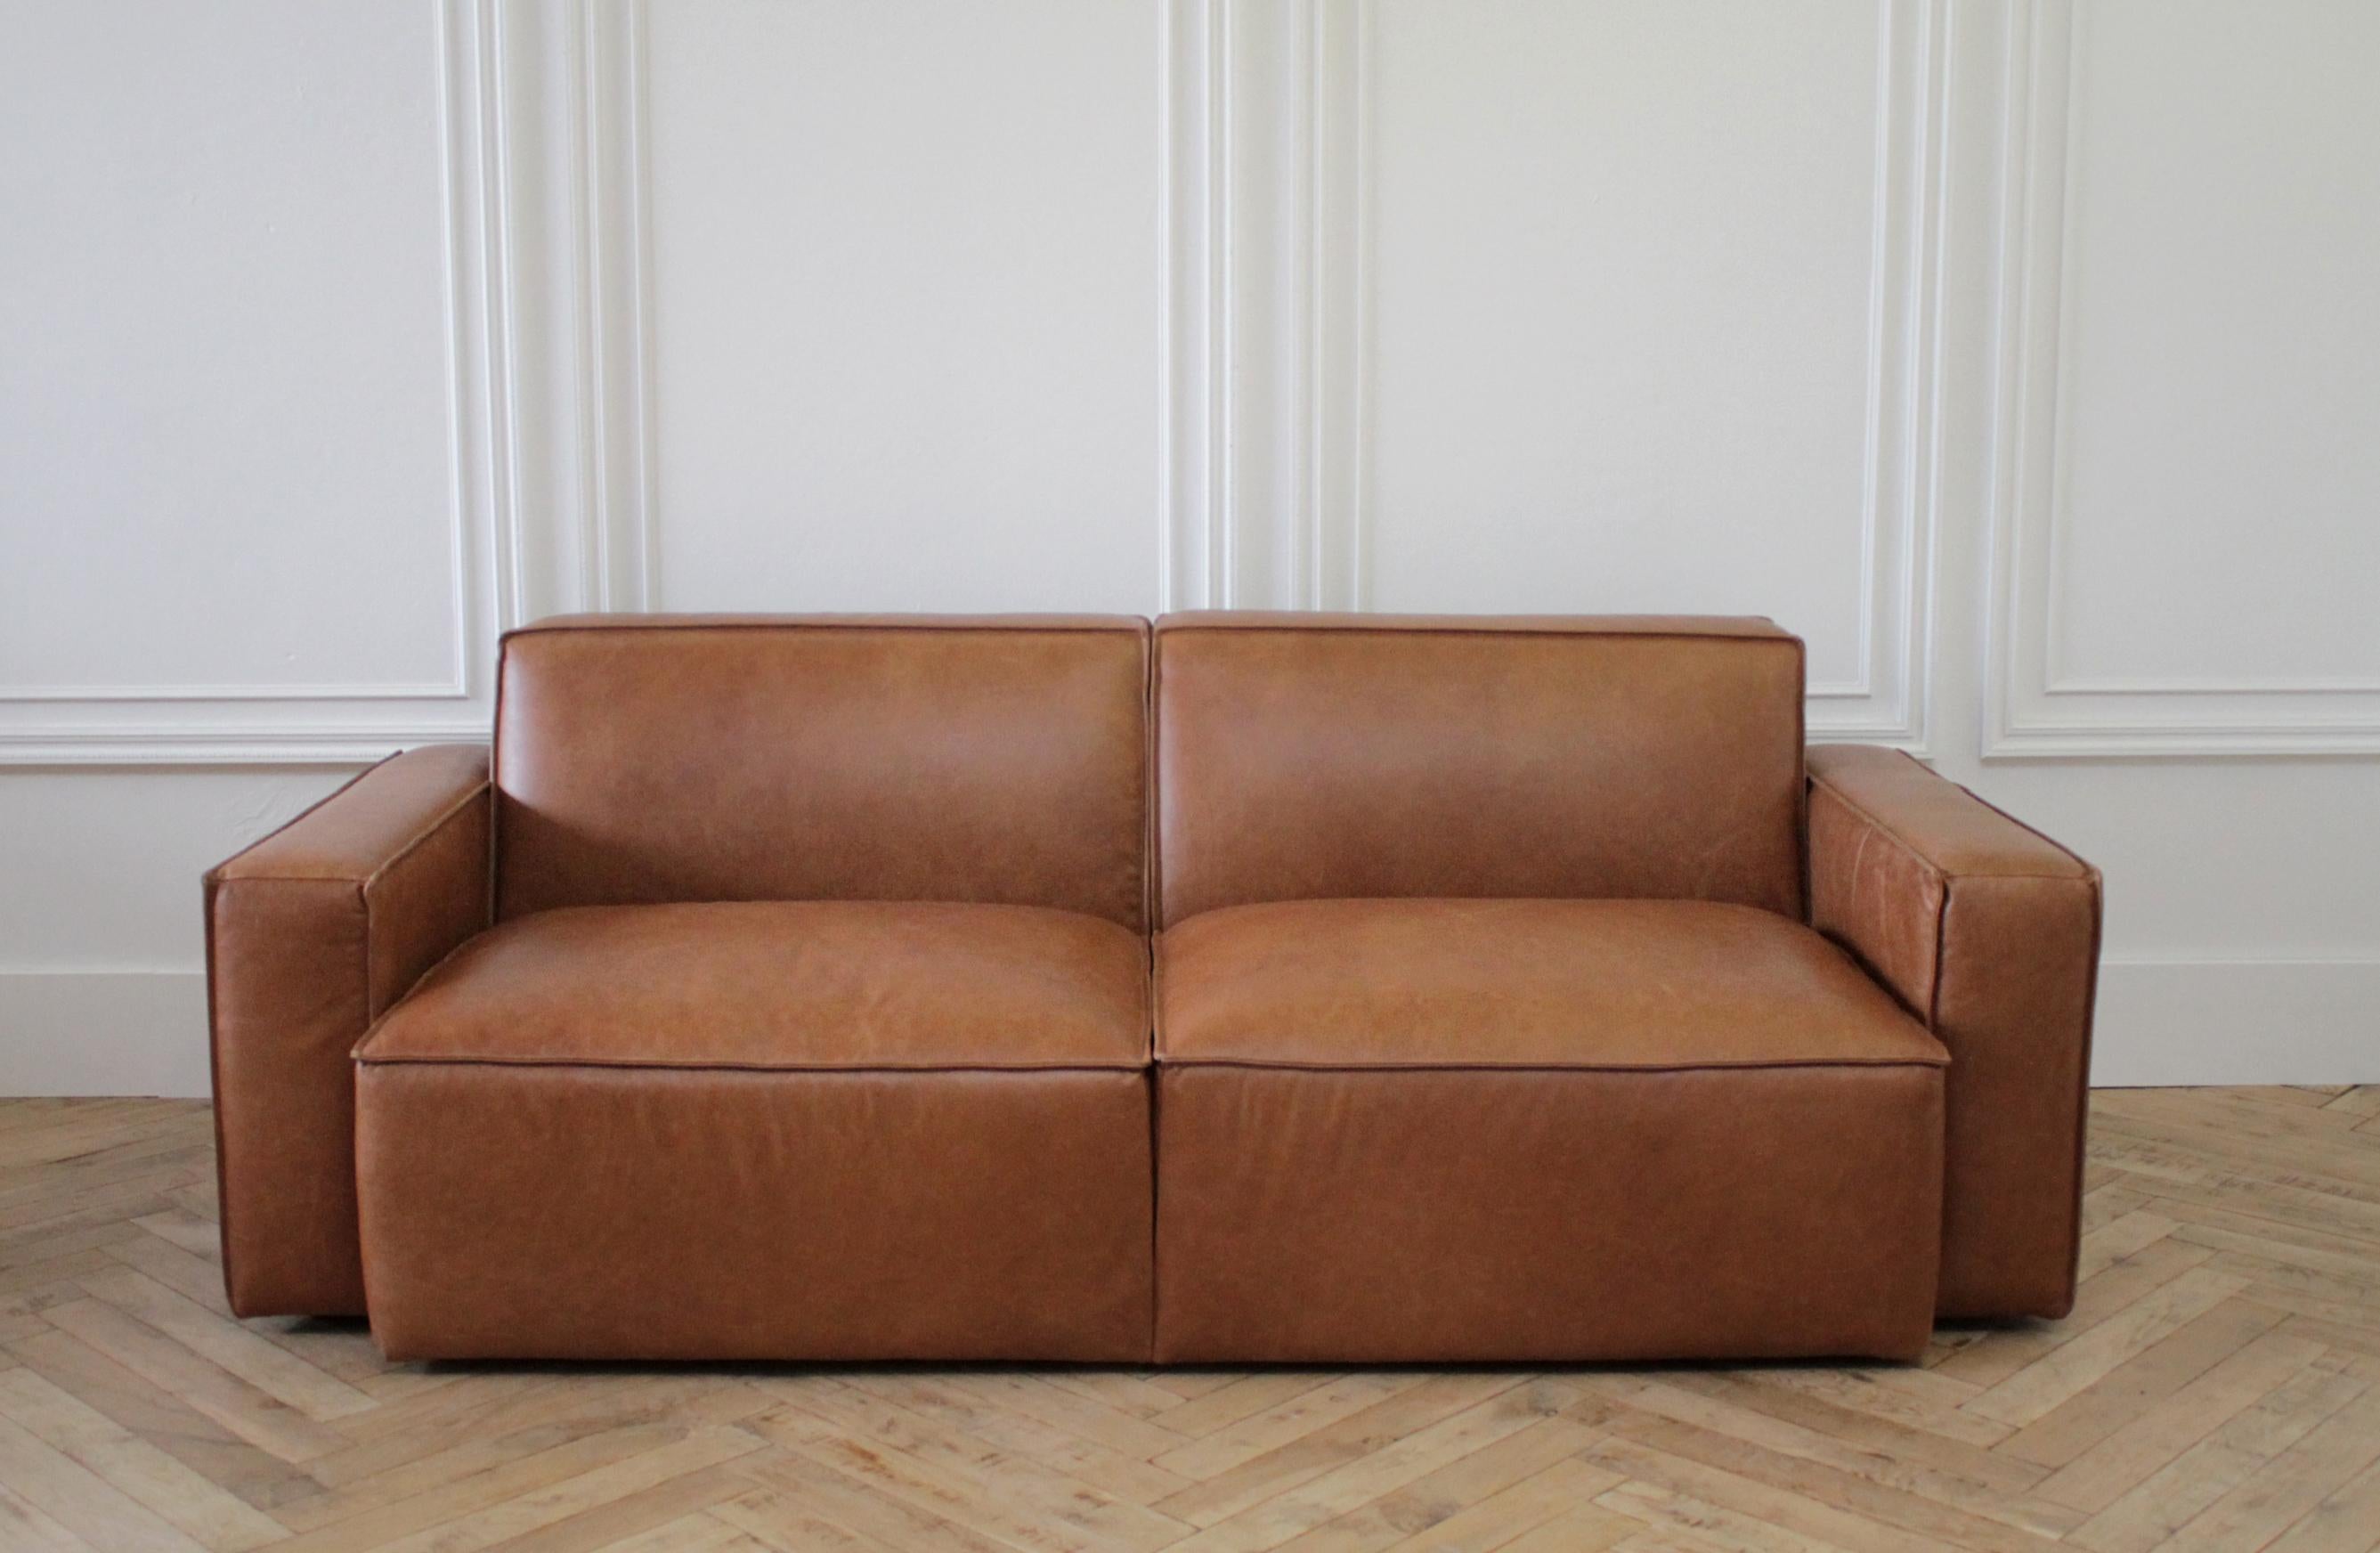 Brown leather modern square sofa
2 available, sold separately
Very Comfortable, arms are highly padded, seats have a medium firm comfort. Very supportive.
Measures:
 82